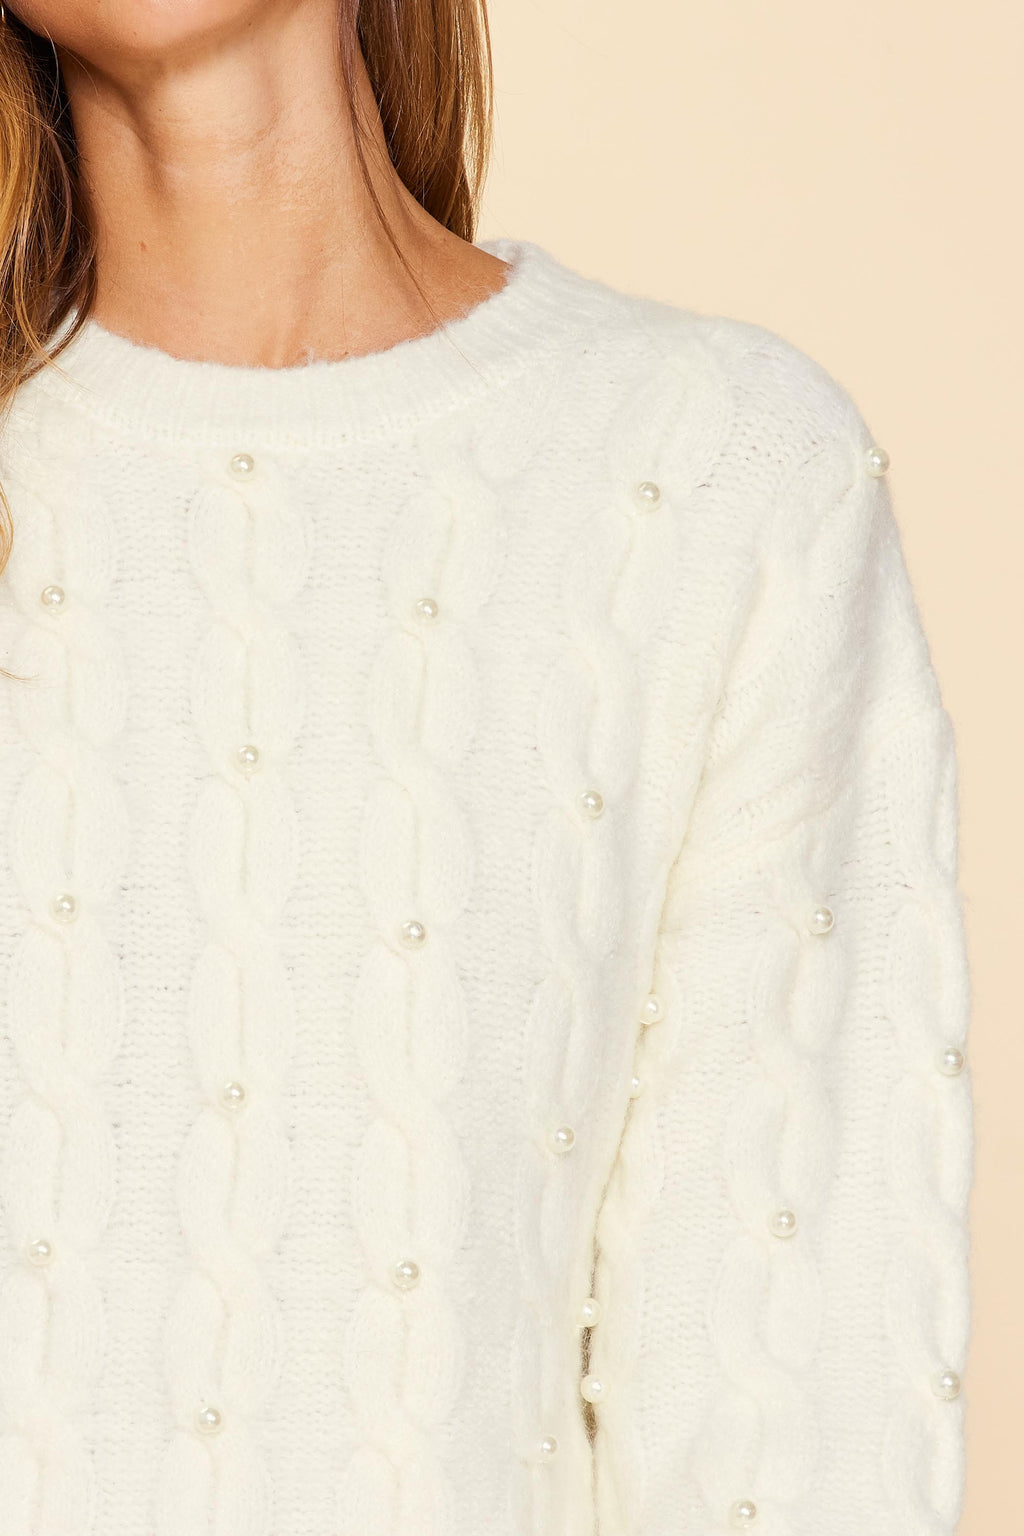 Pearl Detail Cable Knit Sweater- Cream**FINAL SALE**